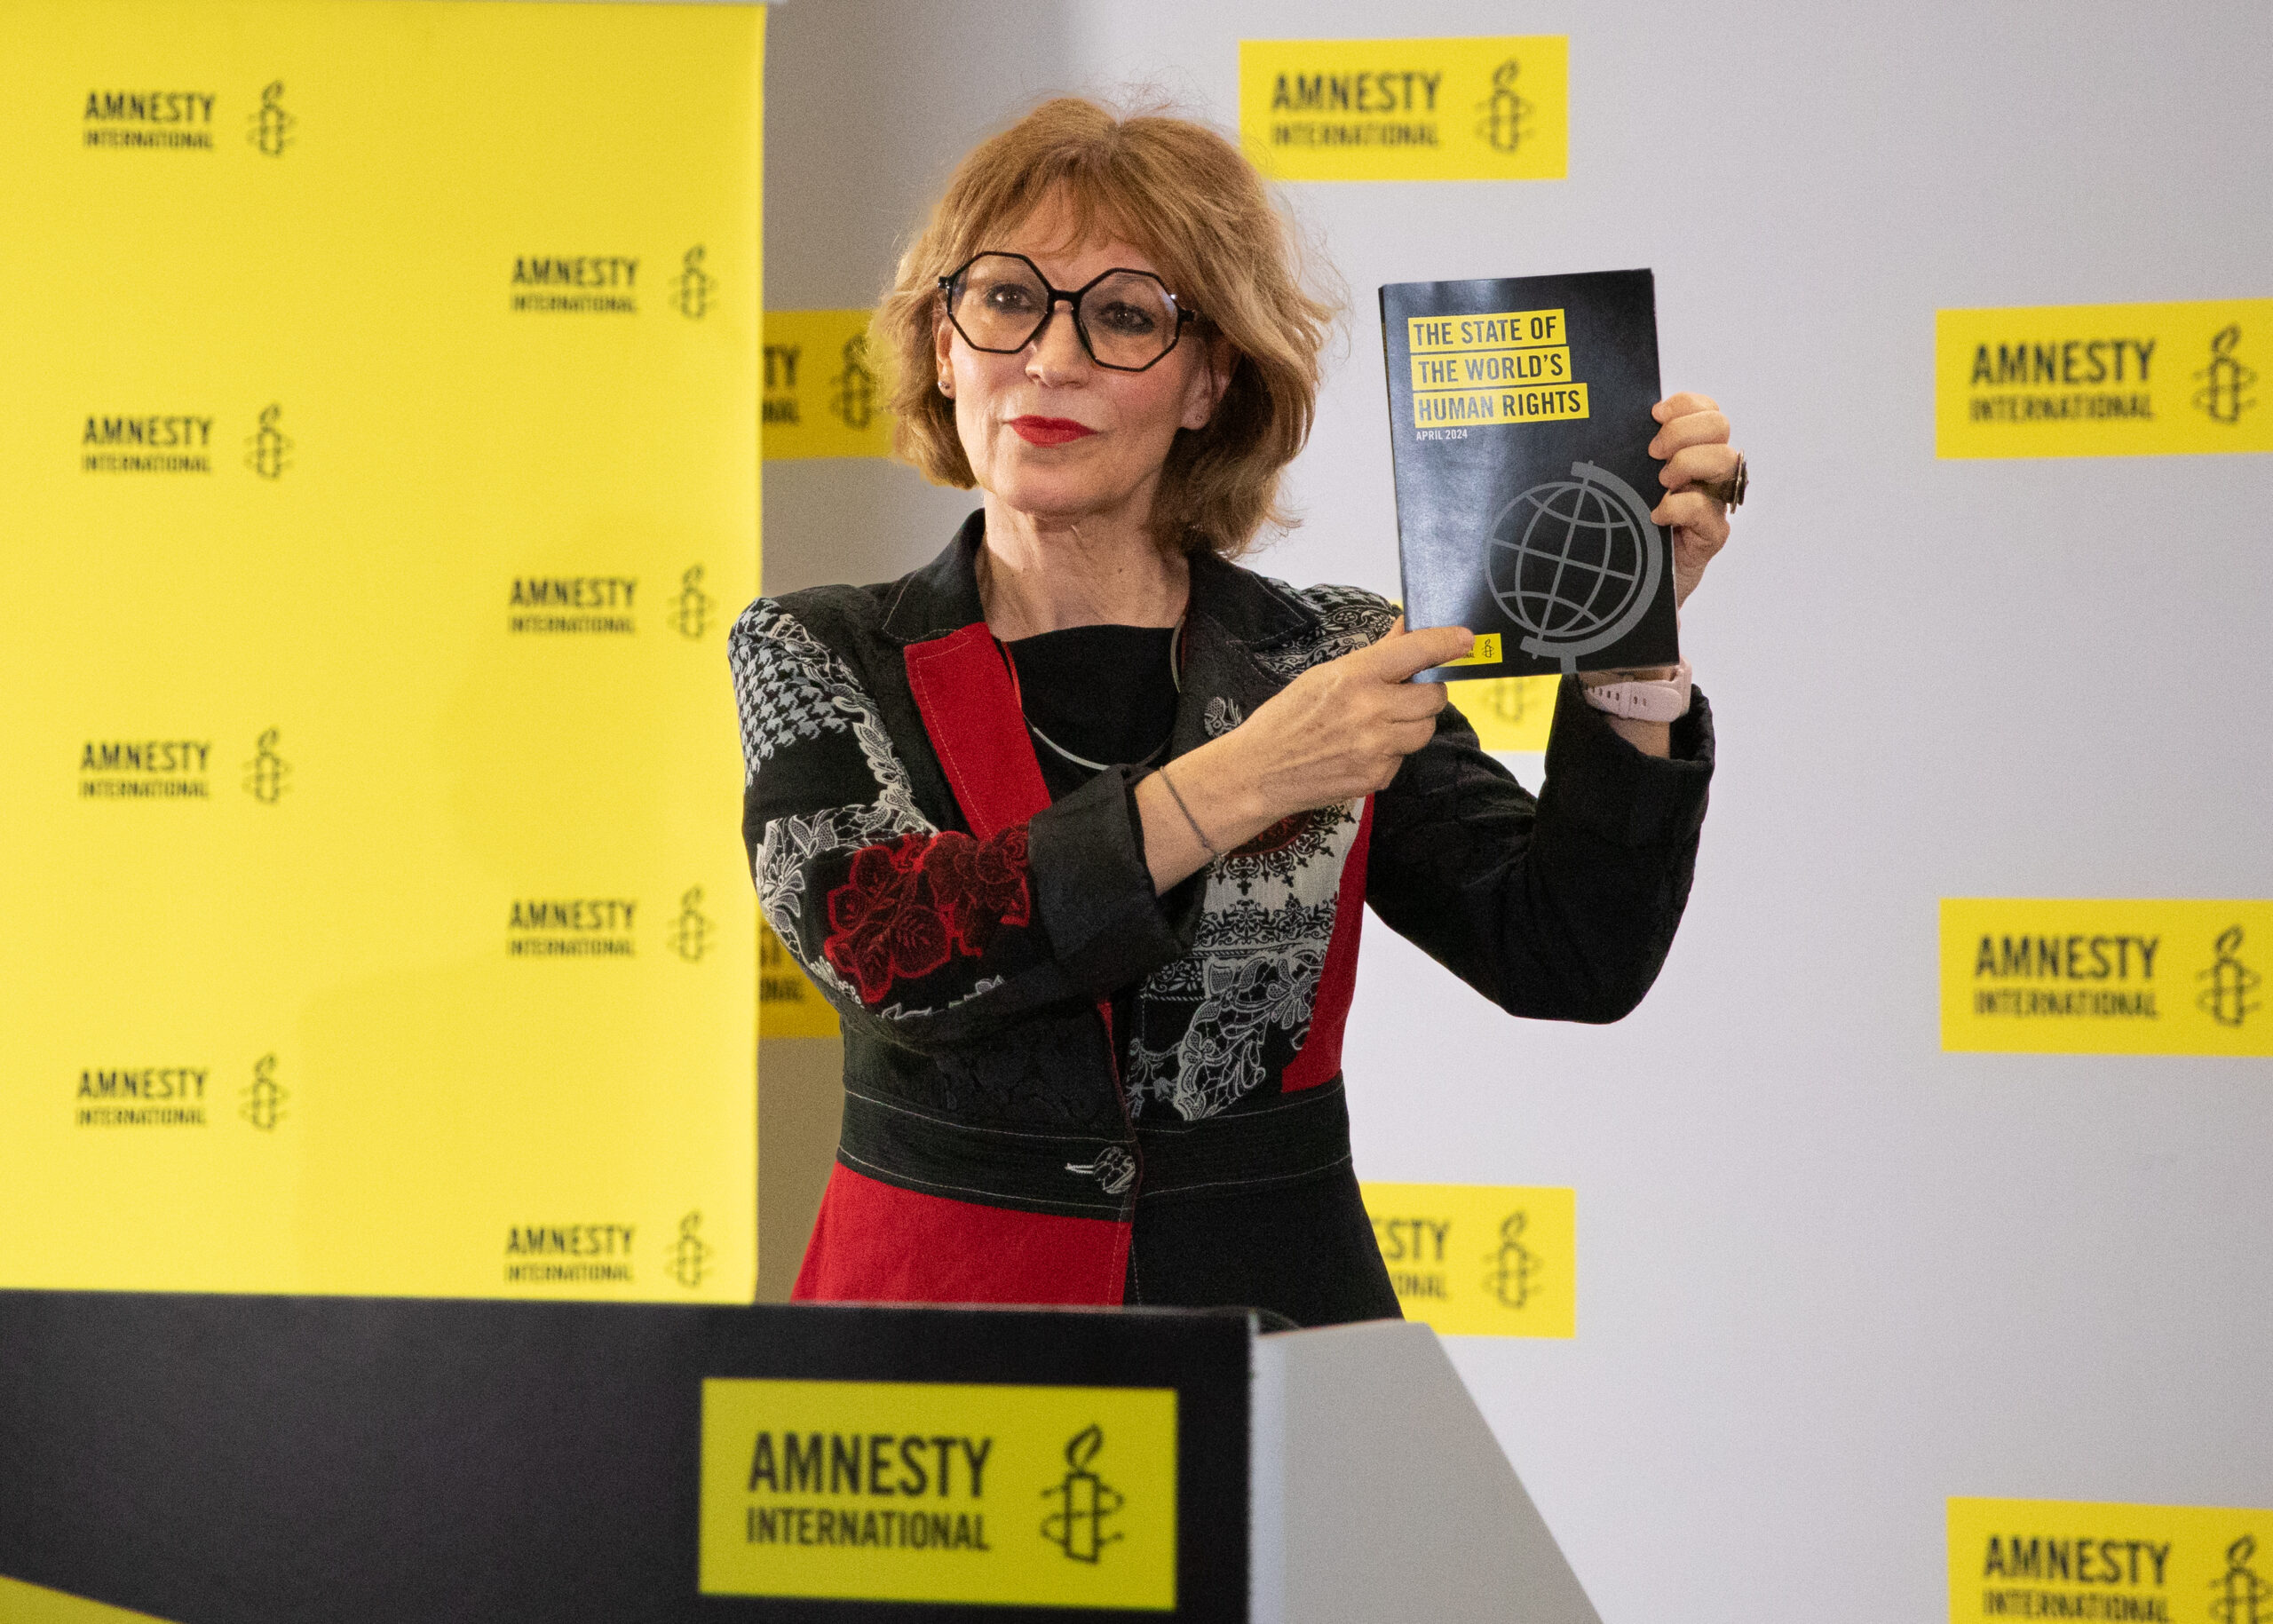 Amnesty International sounds alarm on a watershed moment for international law amid flagrant rule-breaking by governments and corporate actors